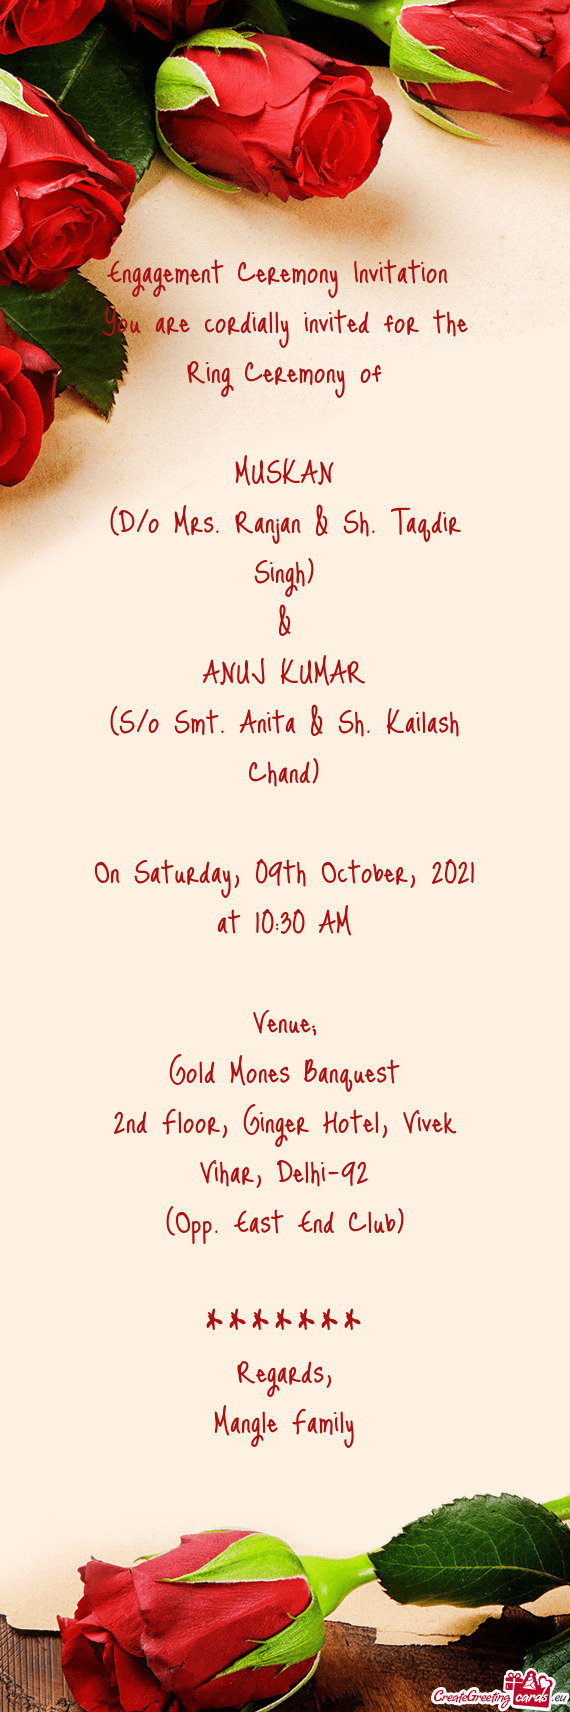 Engagement Ceremony Invitation 
 You are cordially invited for the Ring Ceremony of
 
 MUSKAN
 (D/o